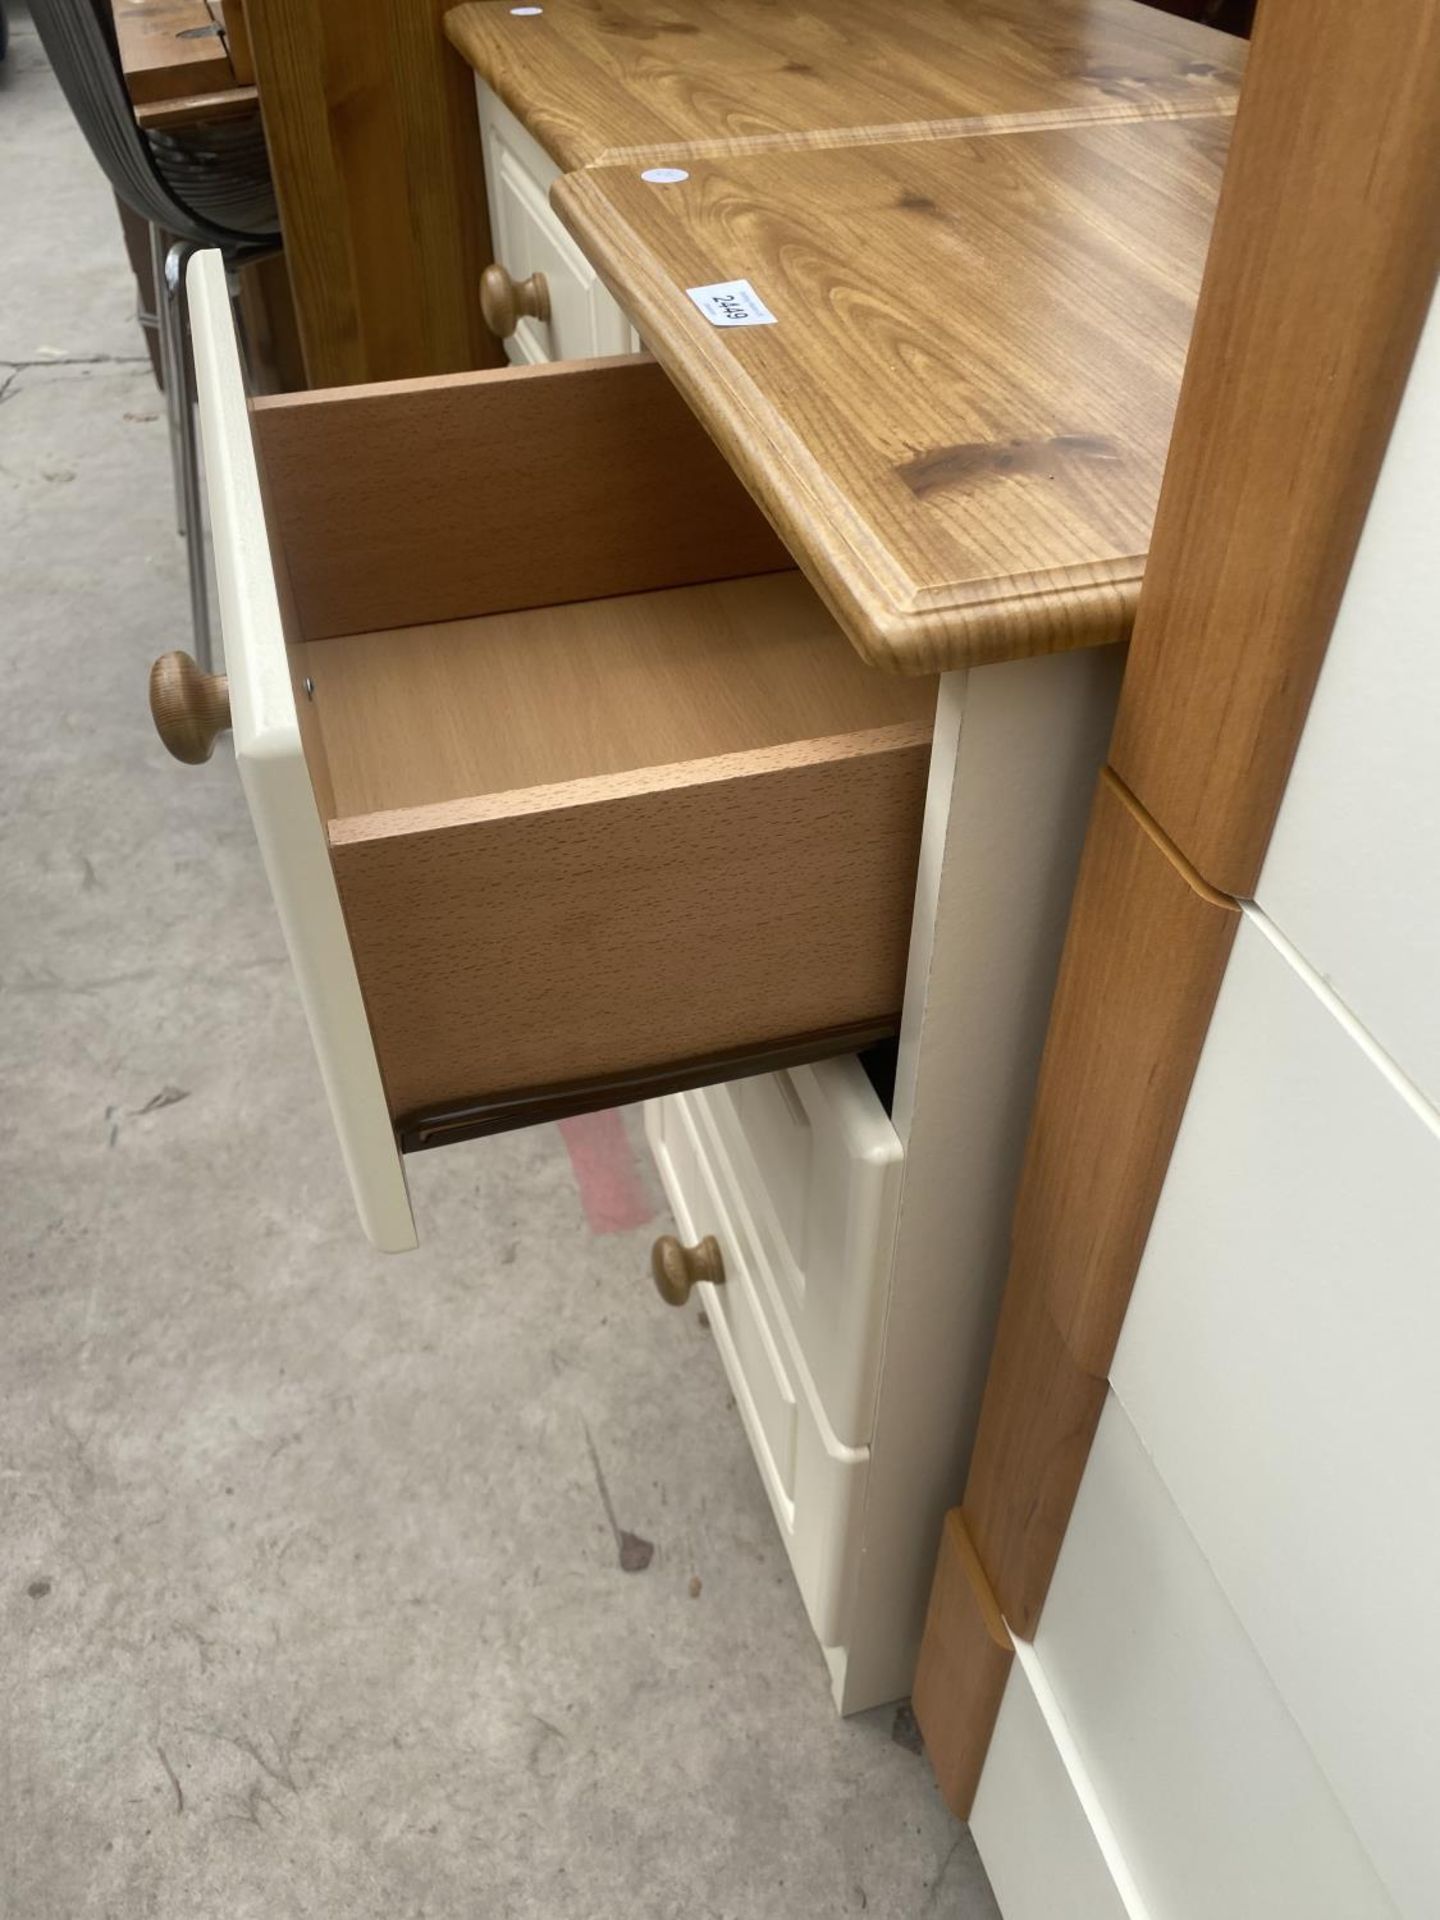 A PAIR OF MODERN BEDROOM CHESTS - Image 2 of 3